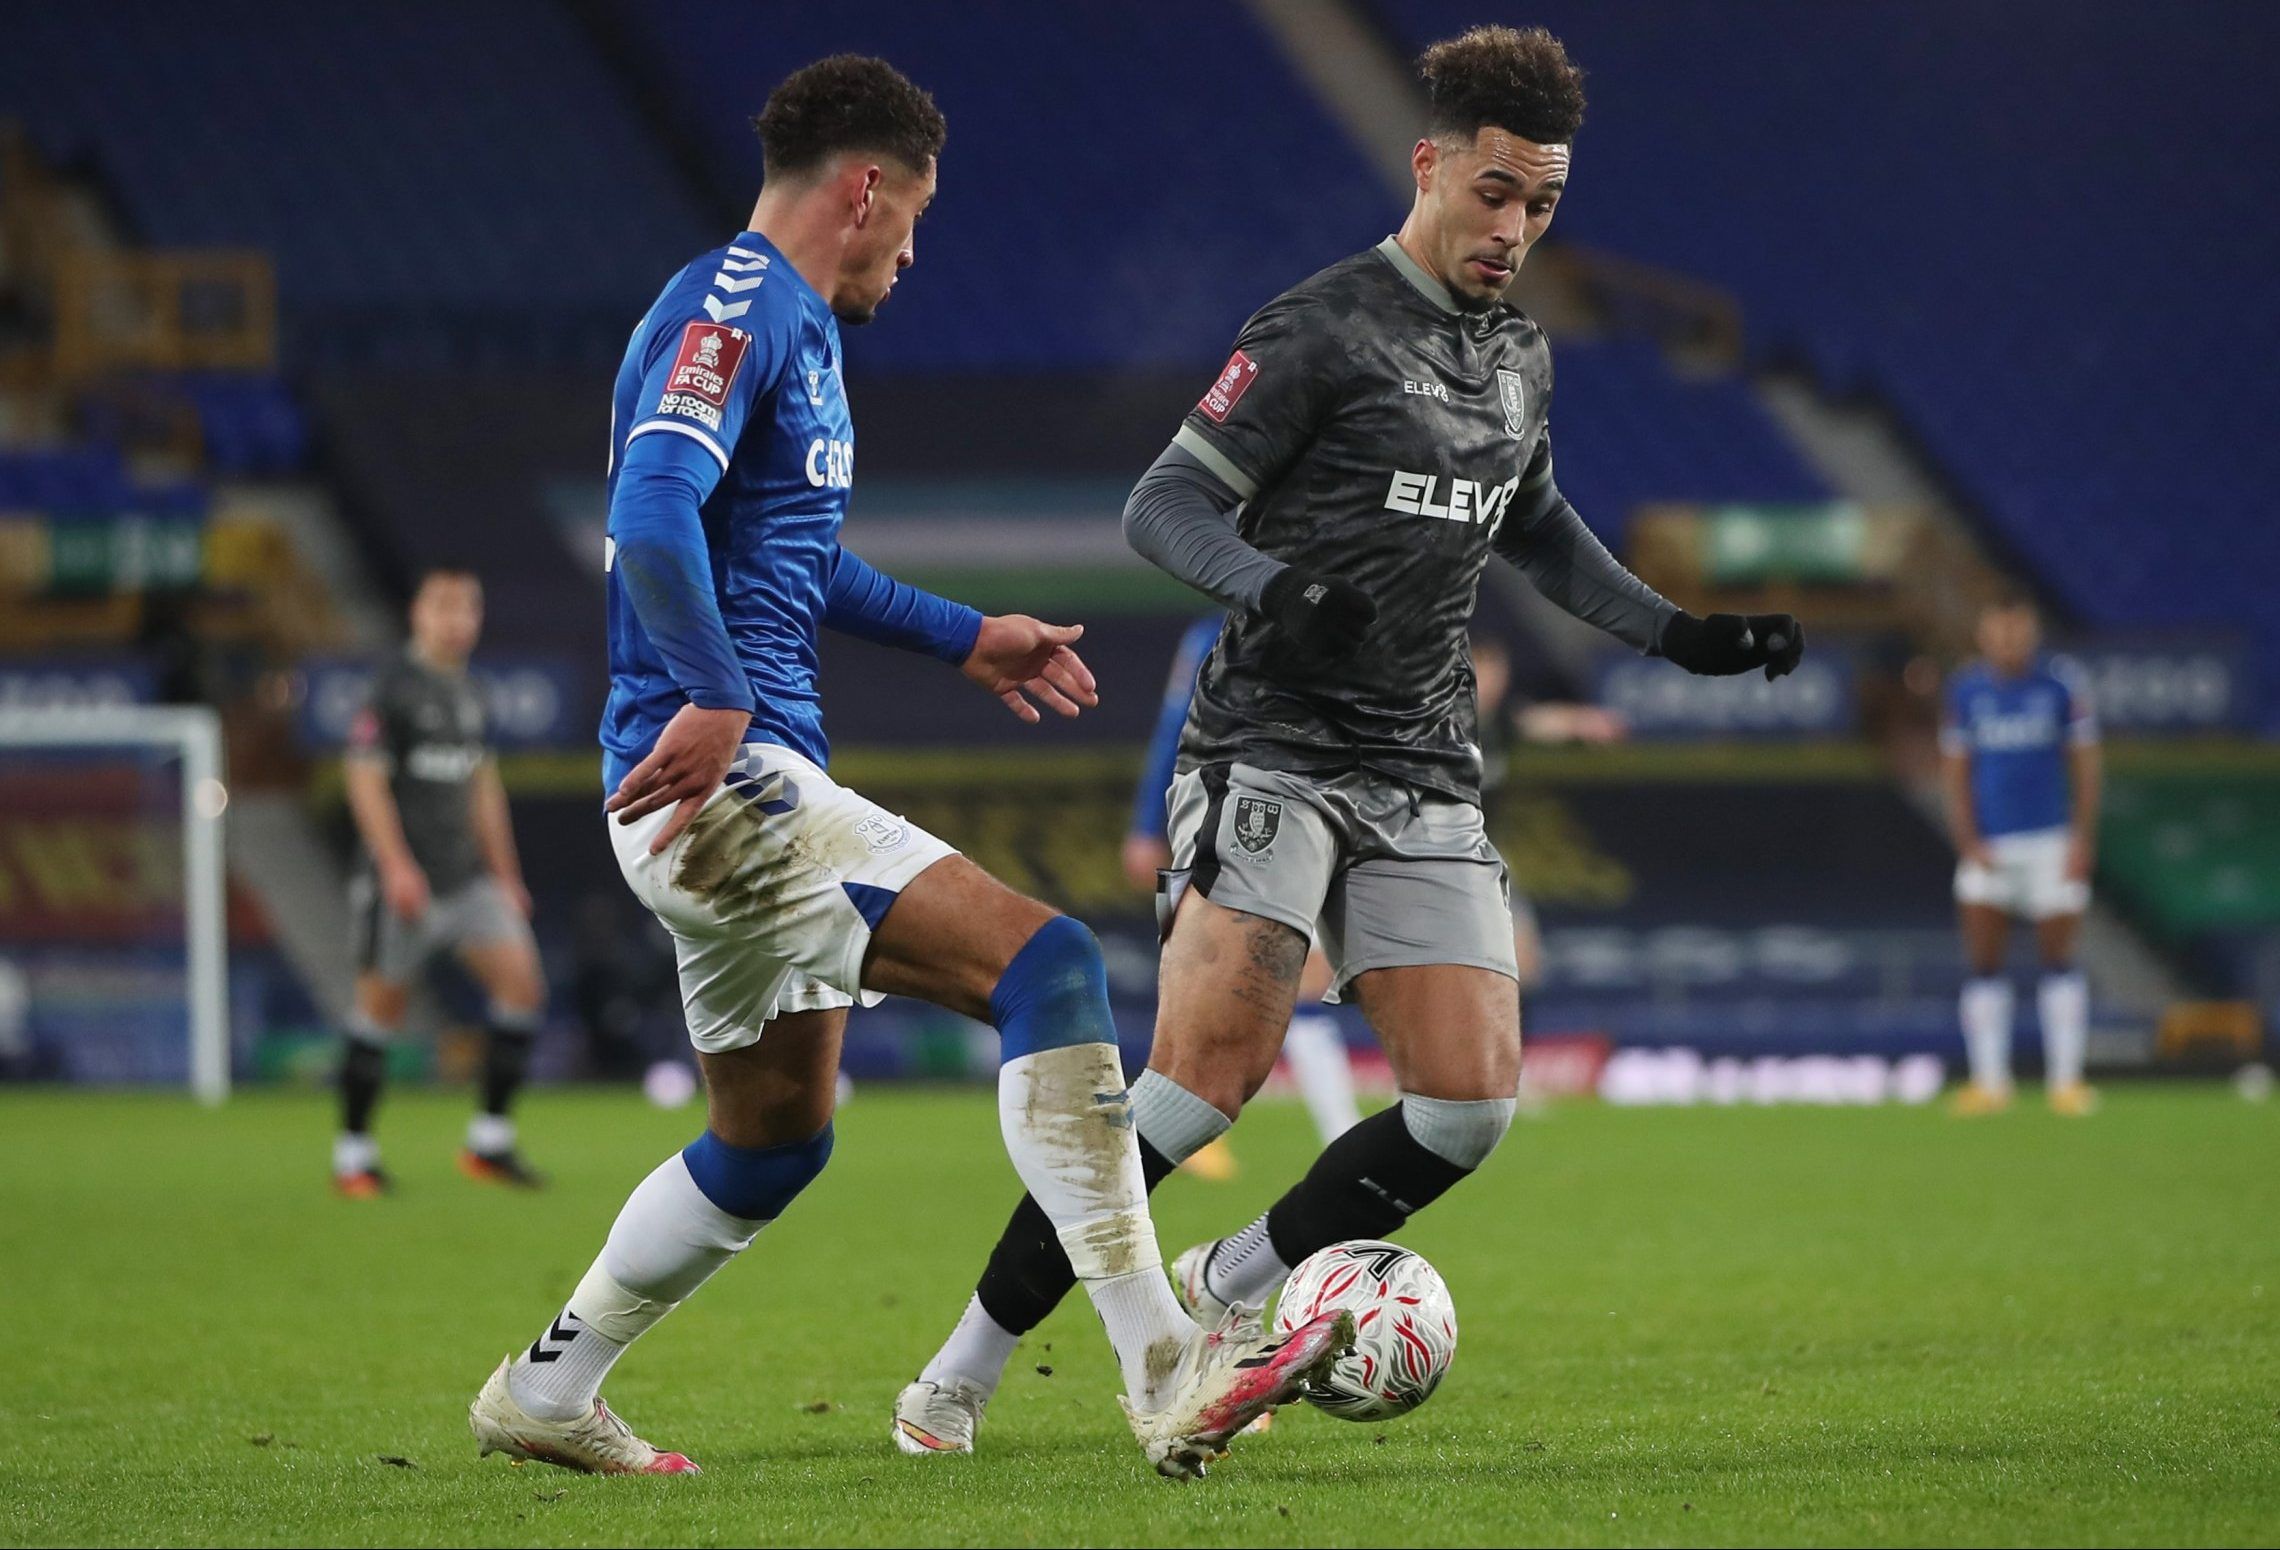 sheffield wednesday winger andre green in action against everton fa cup